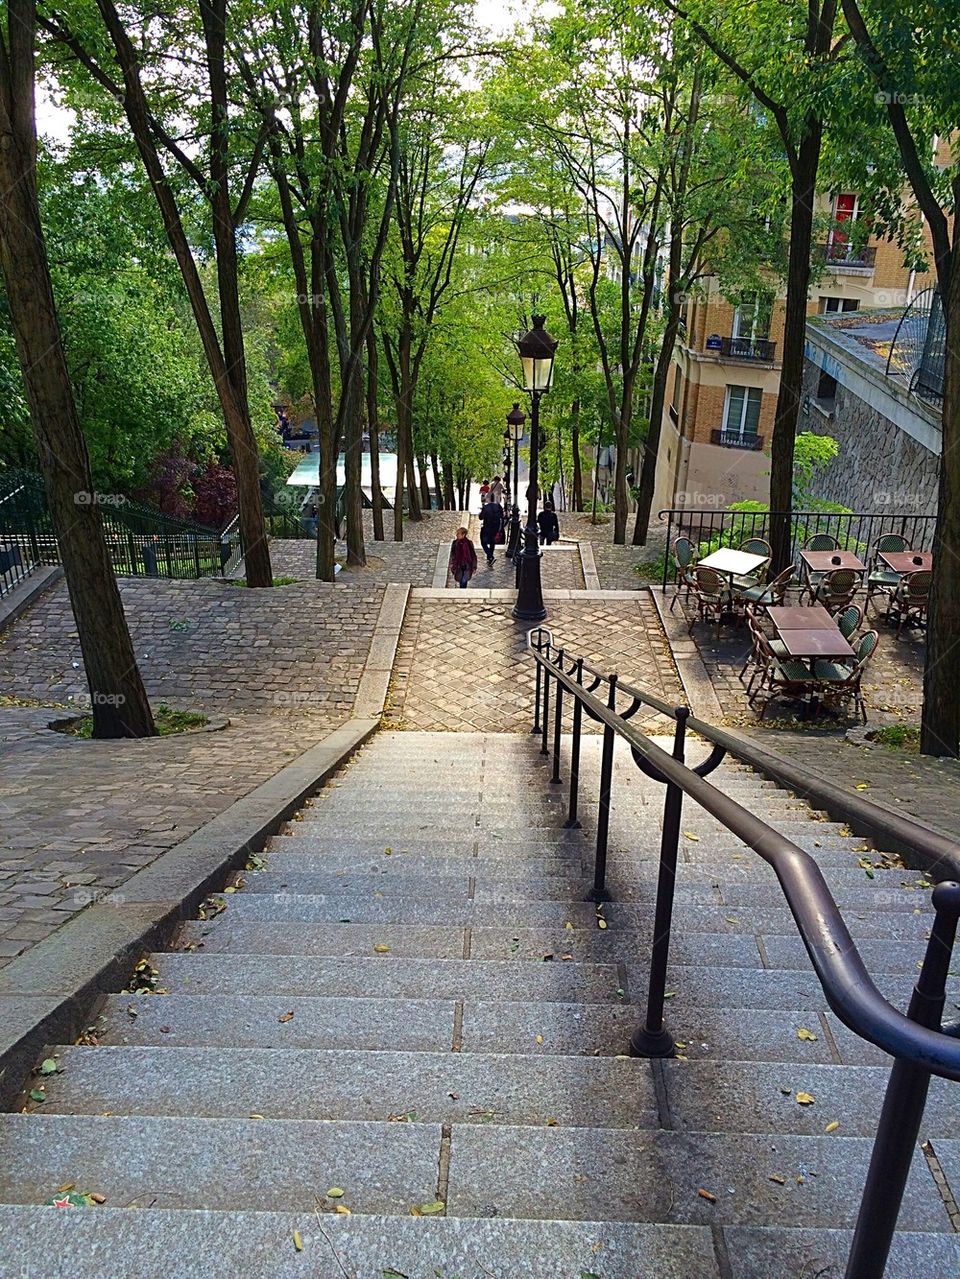 Downward view of stairs in a park